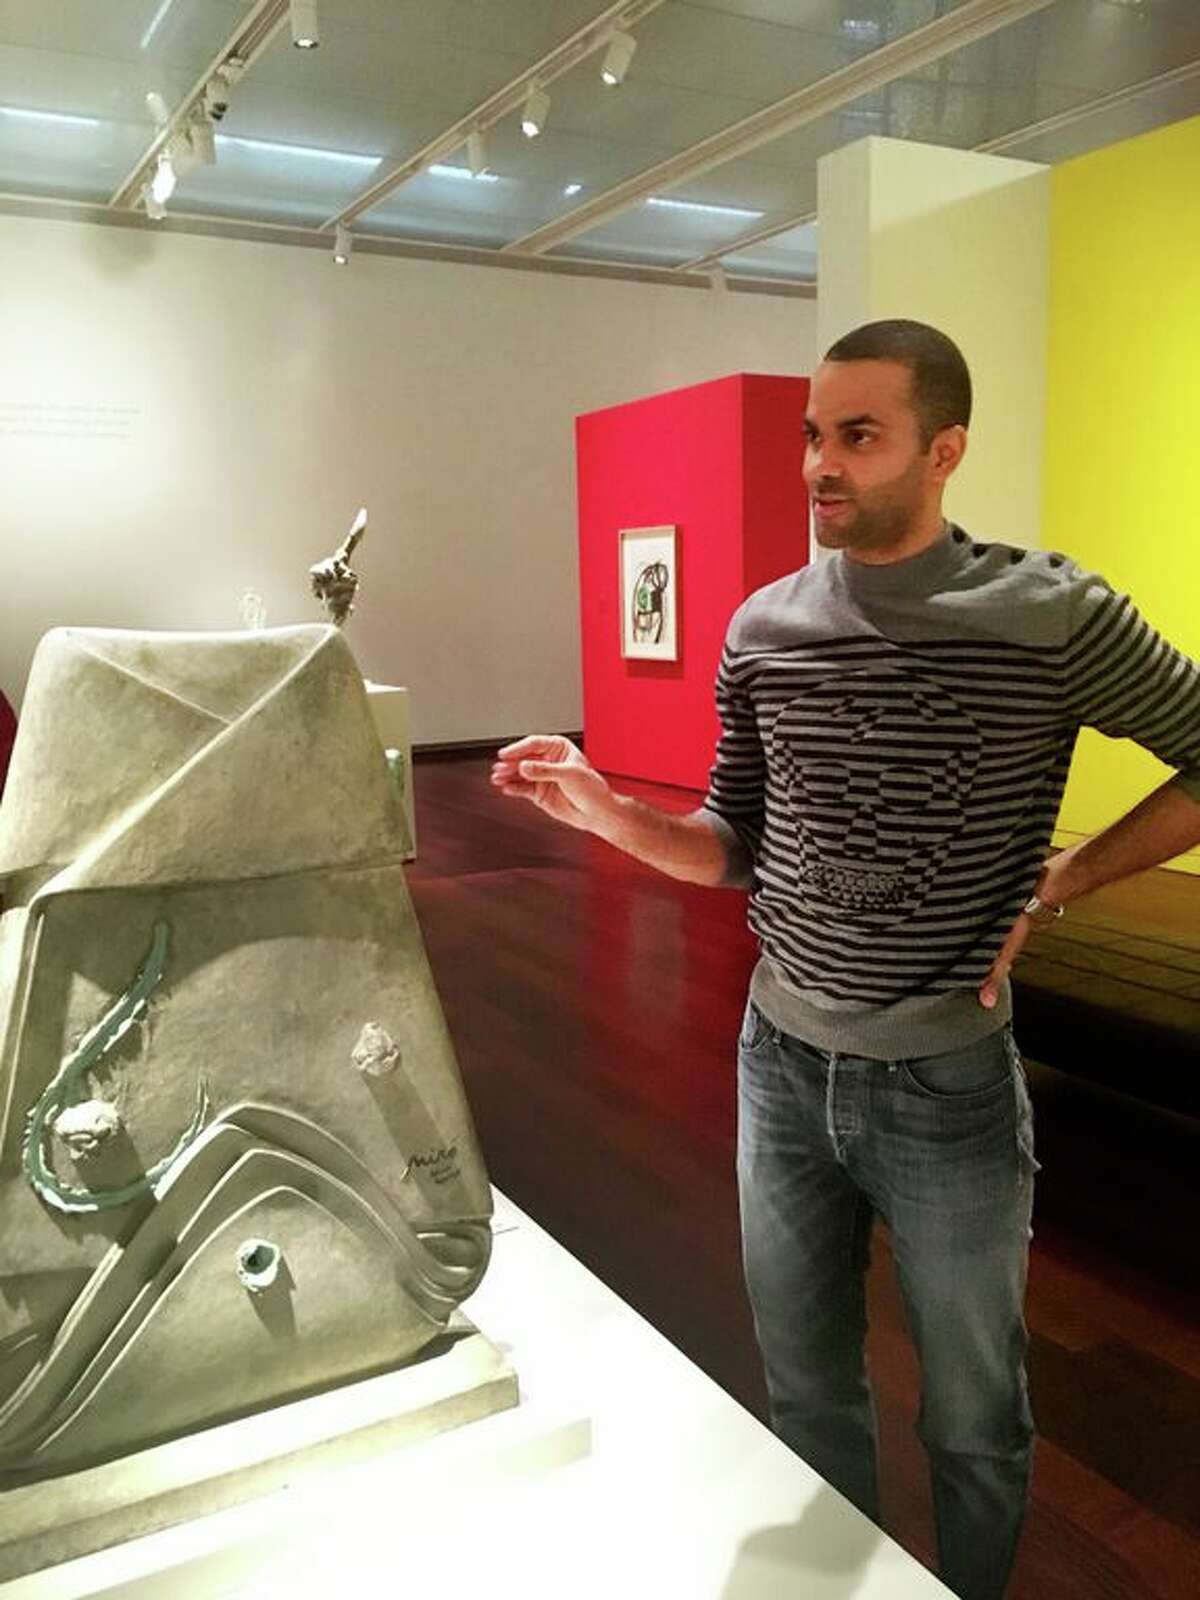 Spur Tony Parker spent much of a recent 90-minute visit to the McNay Art Museum looking at sculptures in an exhibit of work by Joan Miró.